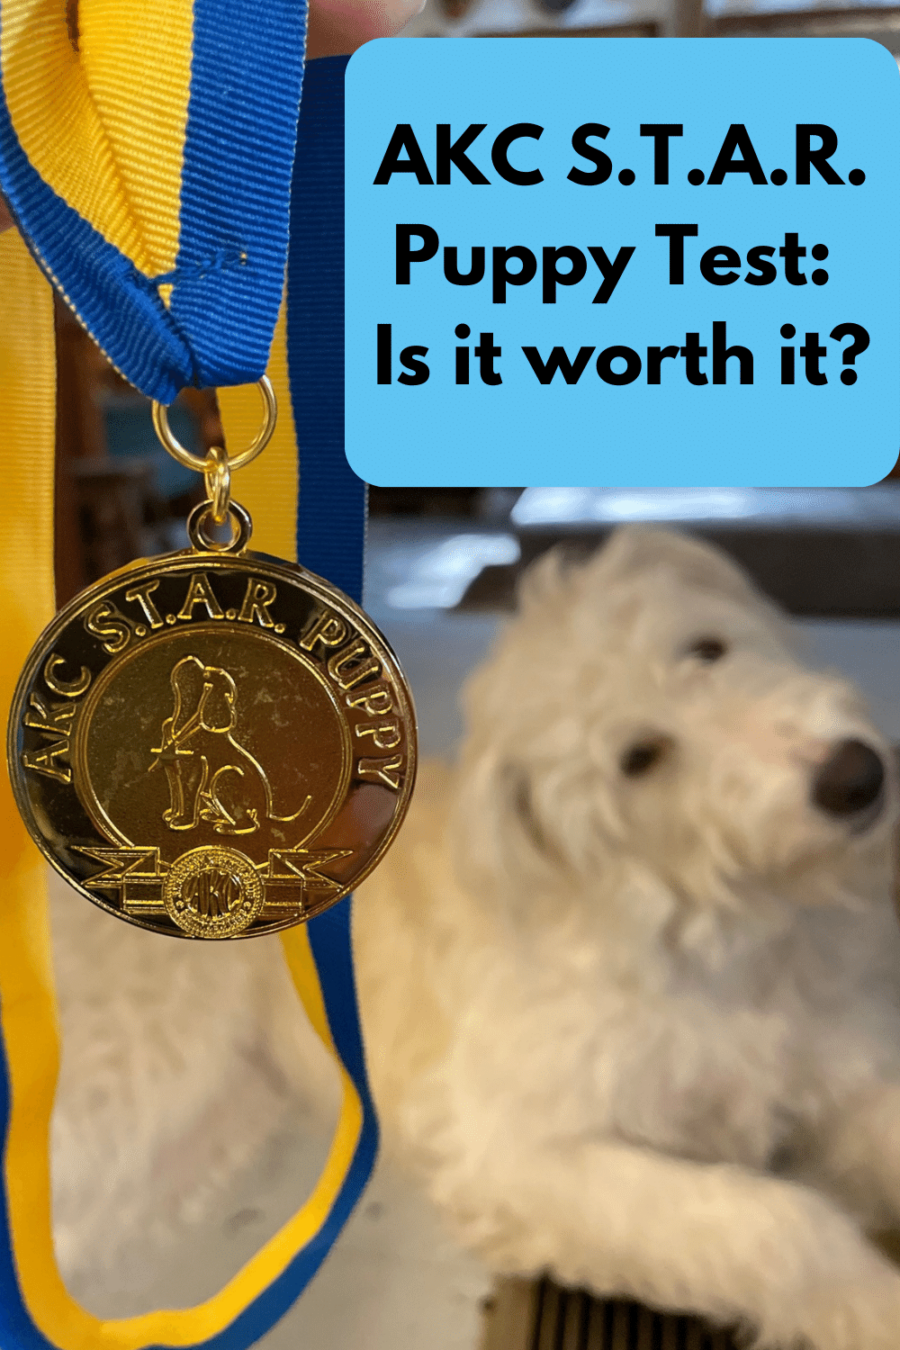 Puppy and AKC S.T.A.R. Puppy medal